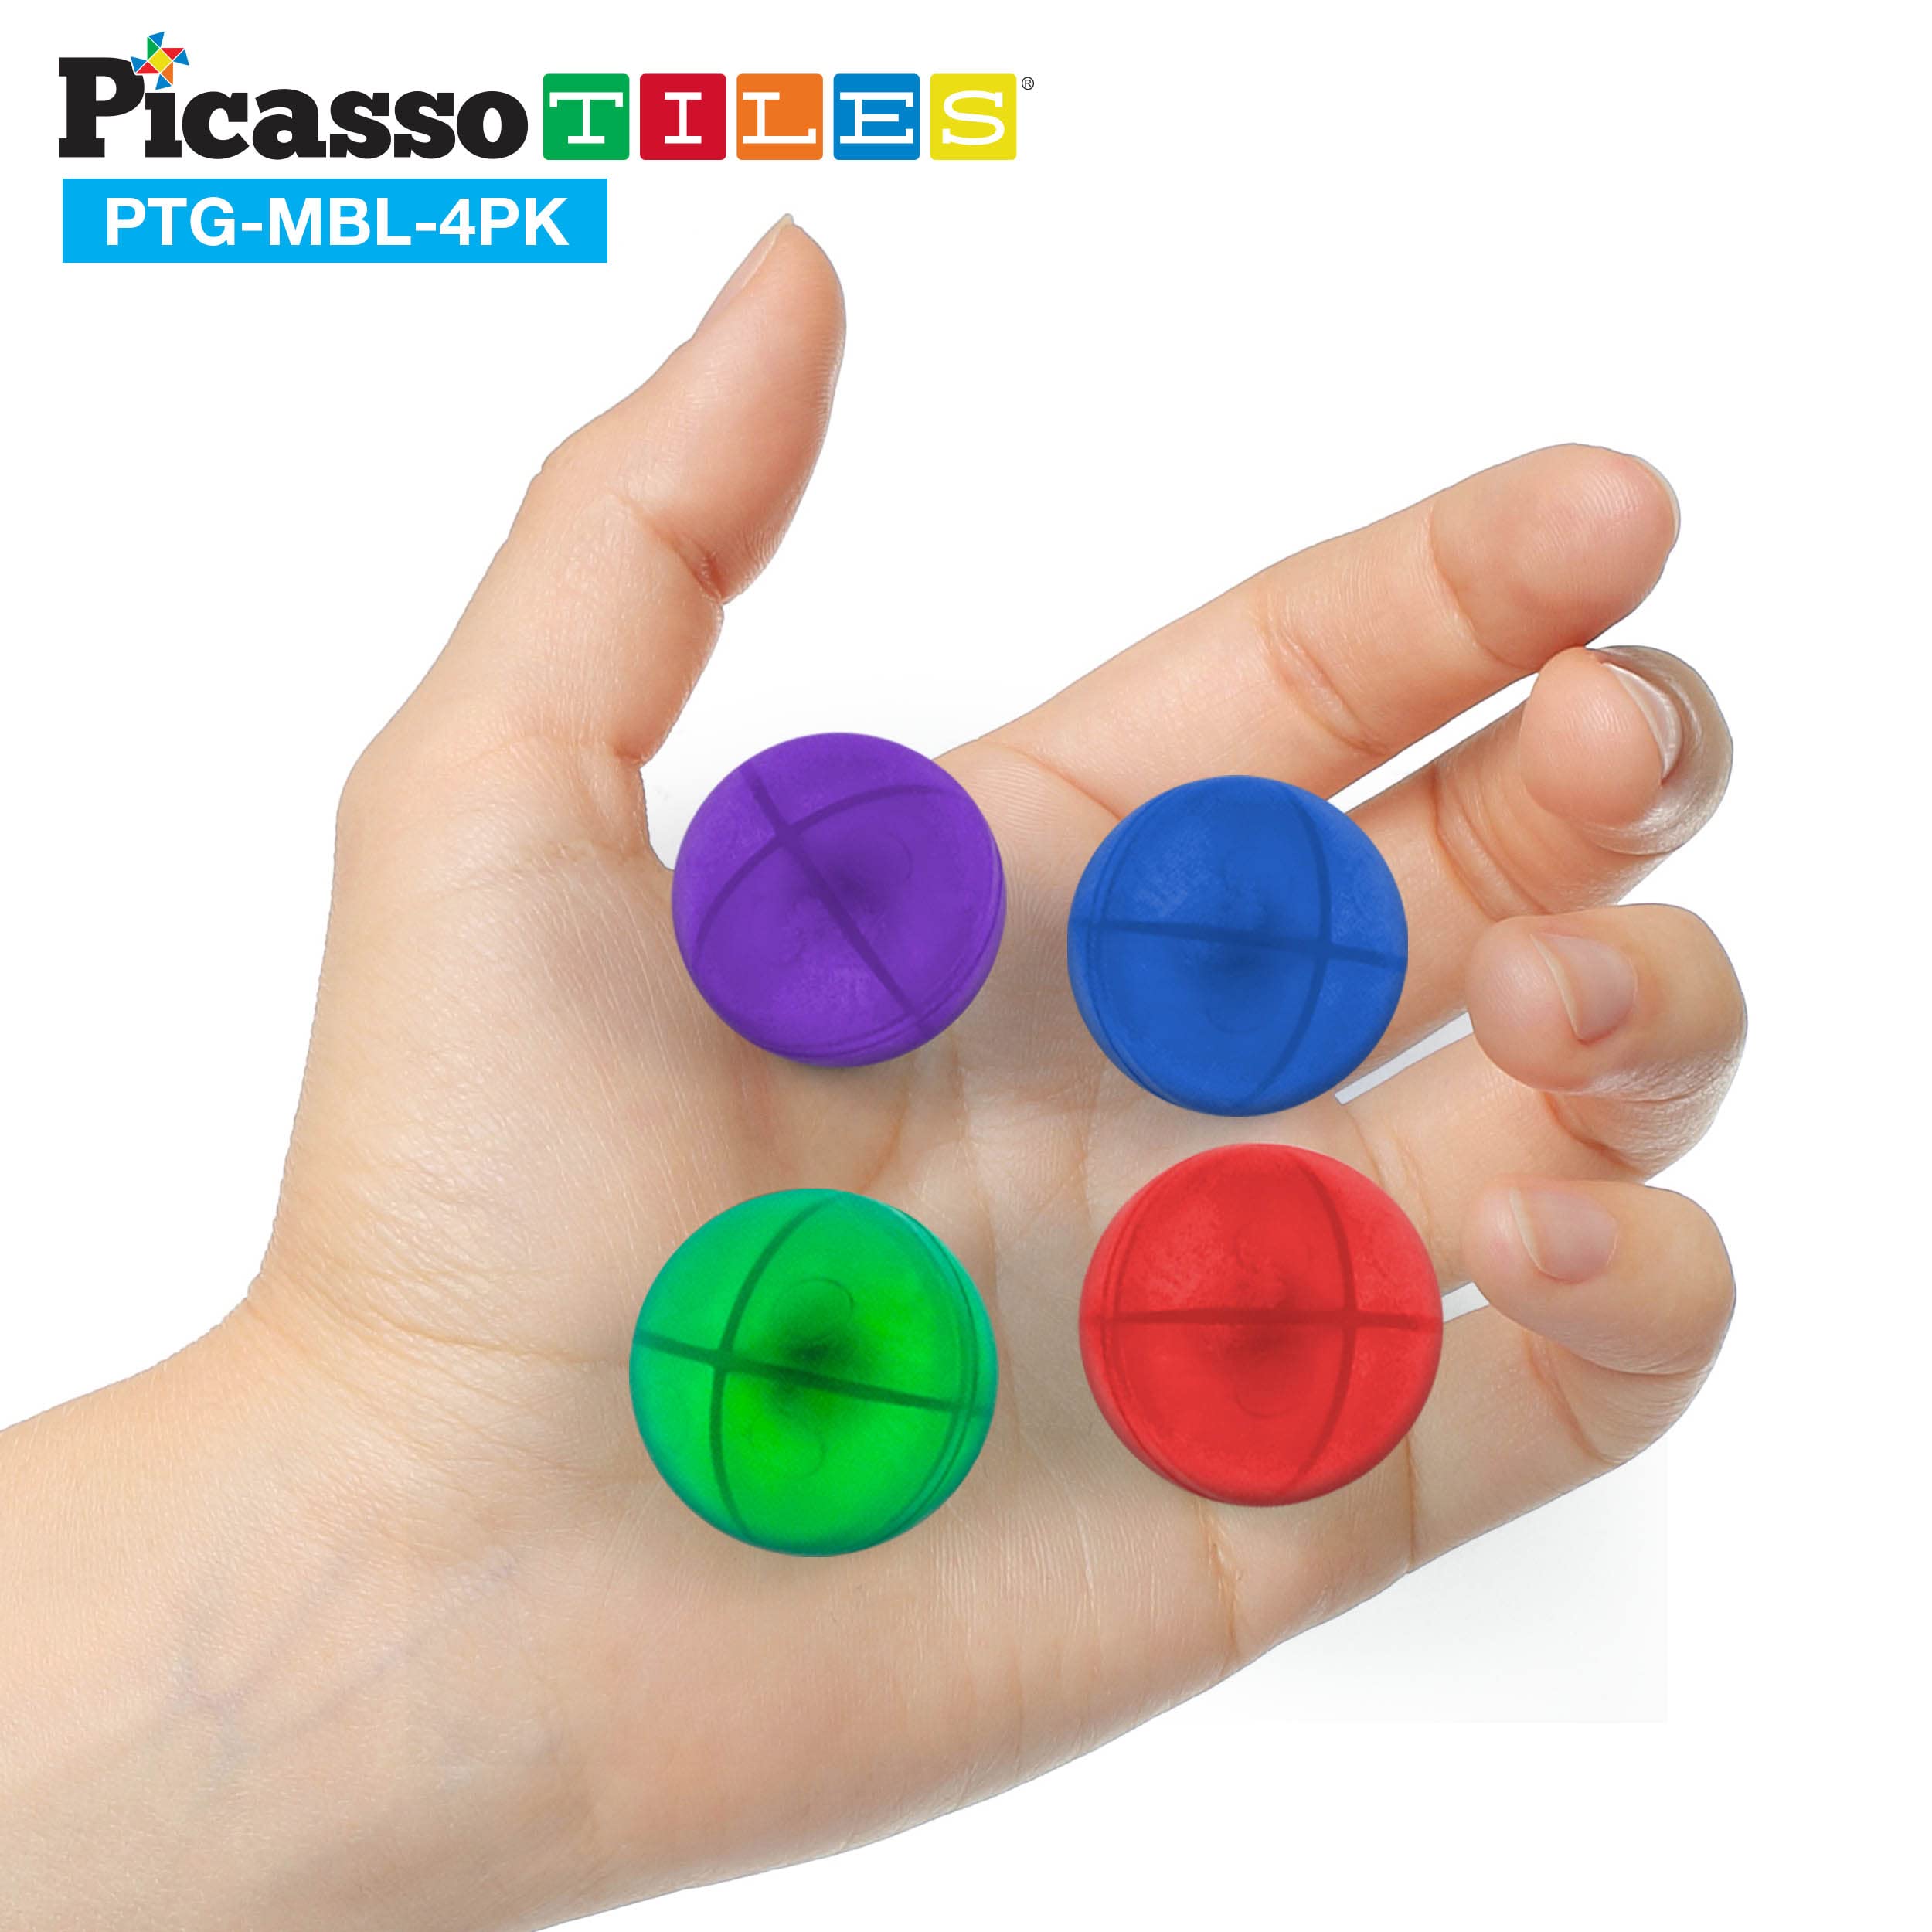 PicassoTiles 4pc Marbles for Magnetic Block Tiles Marble Run Race Track Magnet Building Tile Blocks Racetrack Maze Construction Toys Creative Toy Girls Boys 3 and Up Early Education STEM Learning Kit